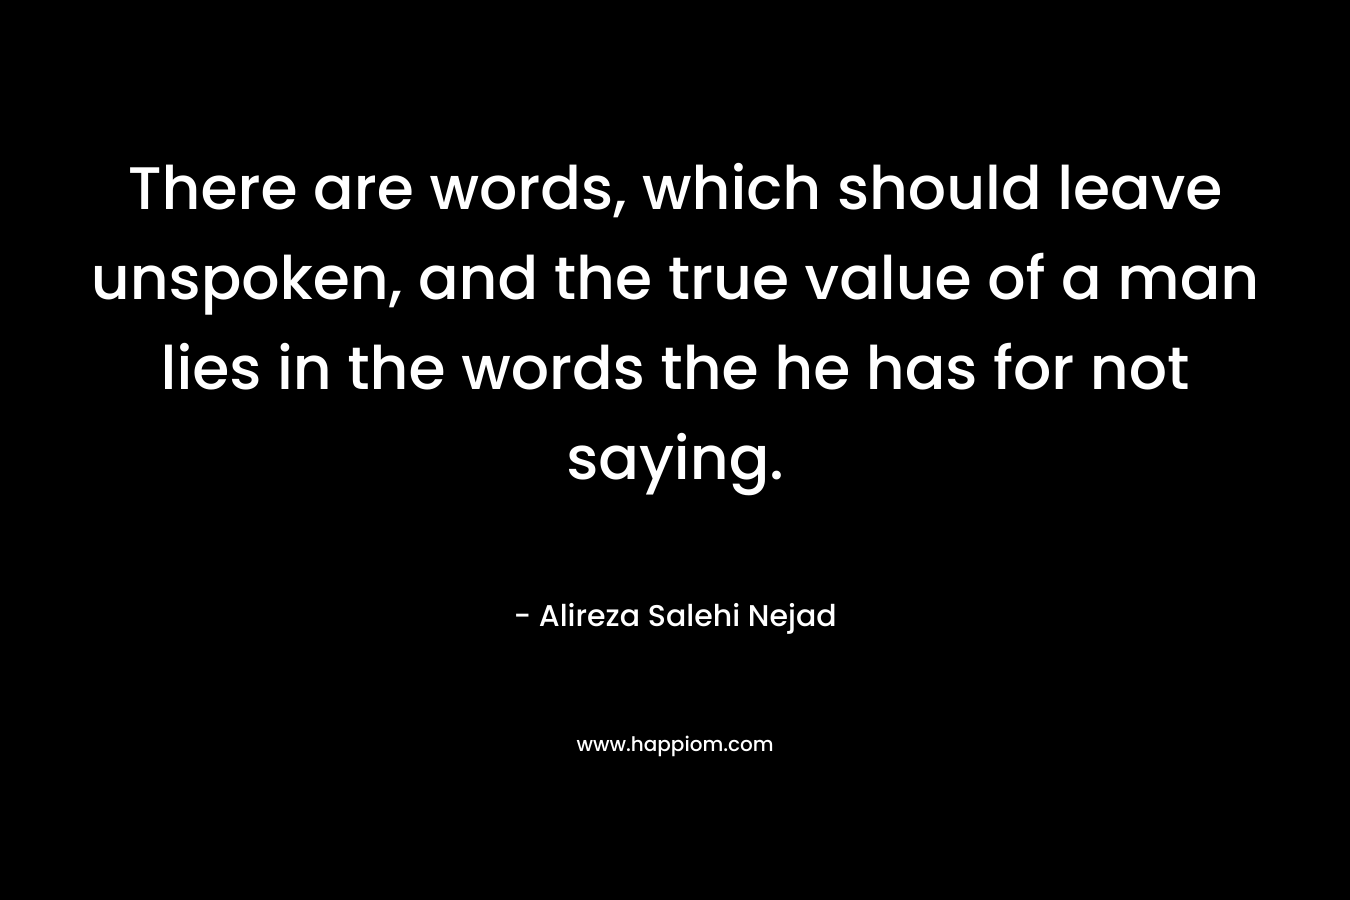 There are words, which should leave unspoken, and the true value of a man lies in the words the he has for not saying.